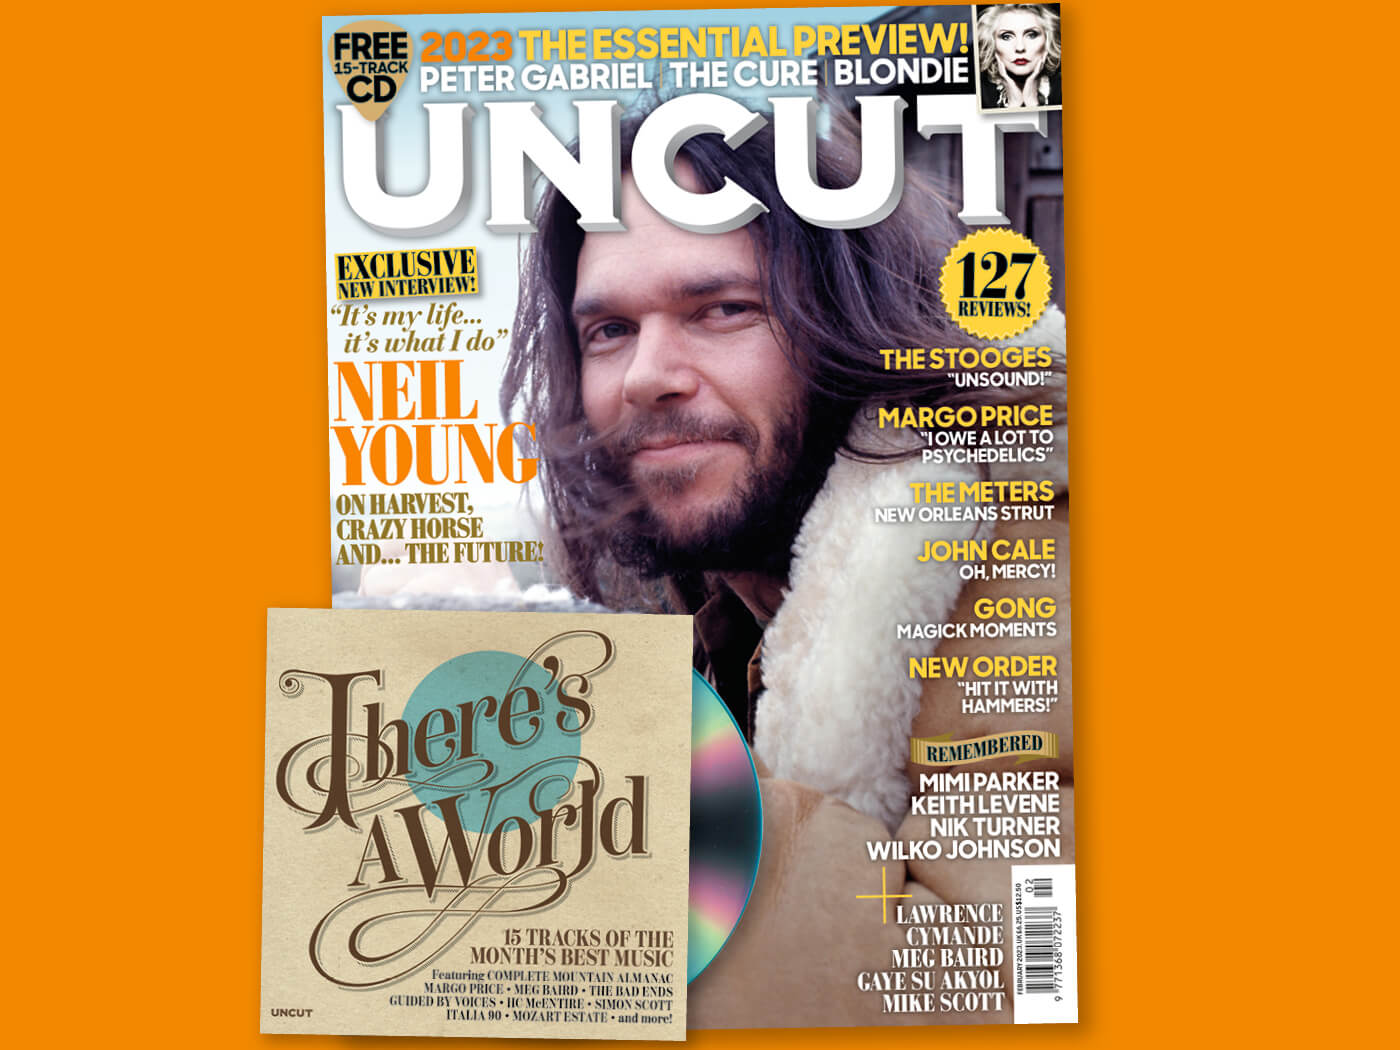 Introducing the new Uncut: Neil Young exclusive, Stooges, our essential 2023 Preview and more